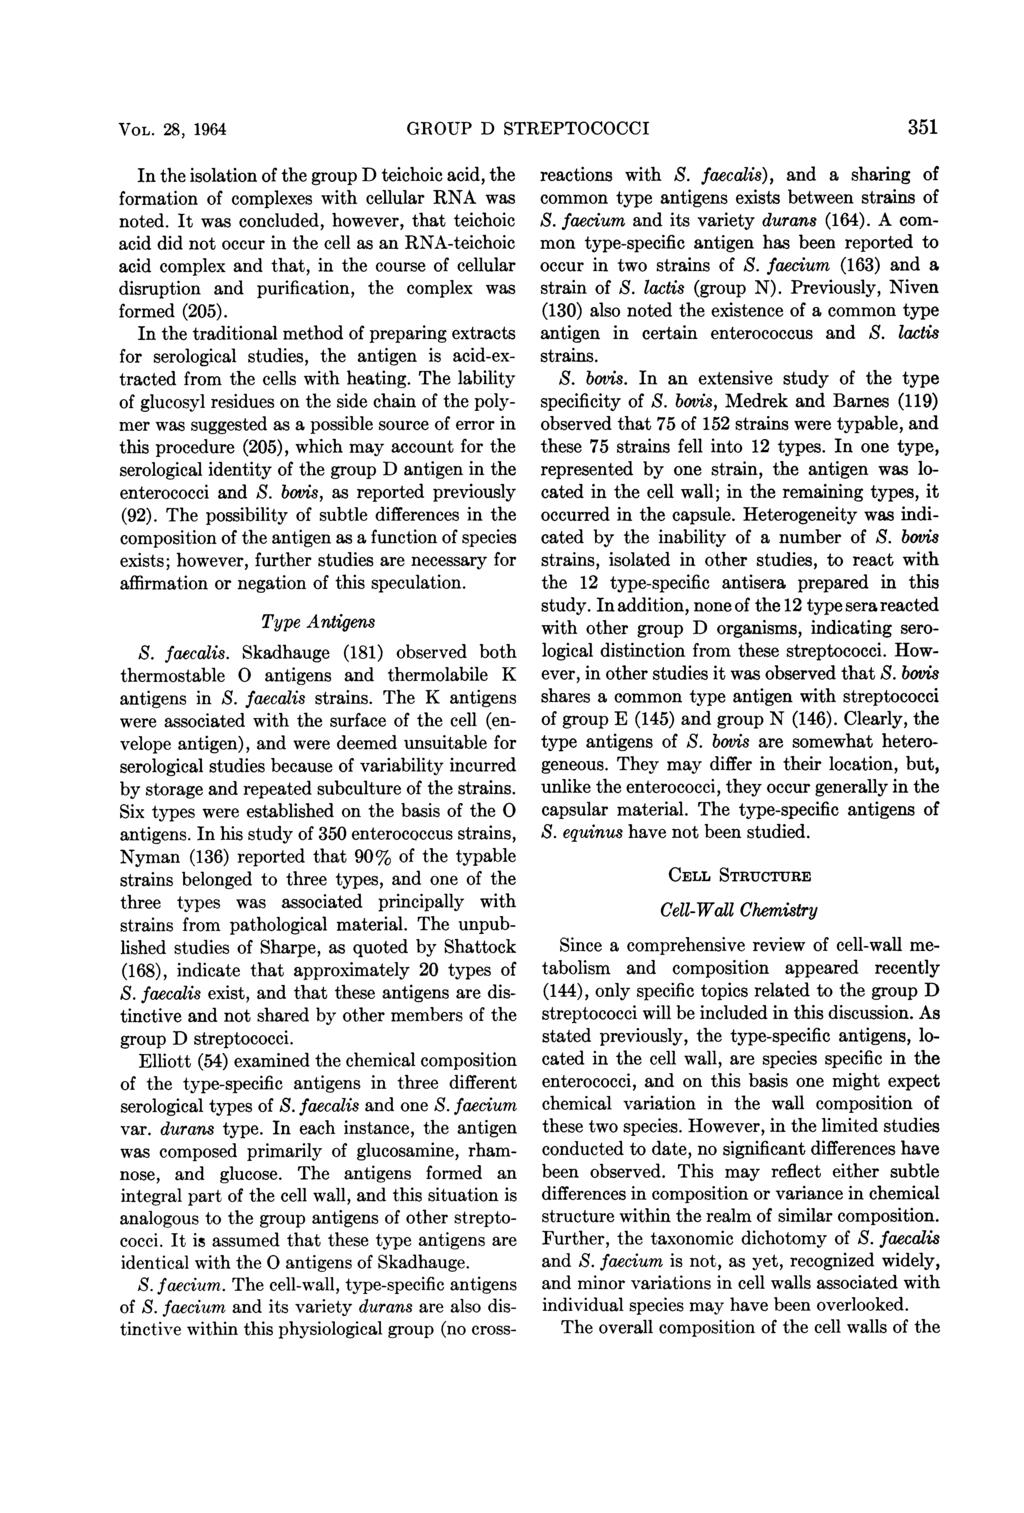 VOL. 28, 1964 In the isolation of the group D teichoic acid, the formation of complexes with cellular RNA was noted.